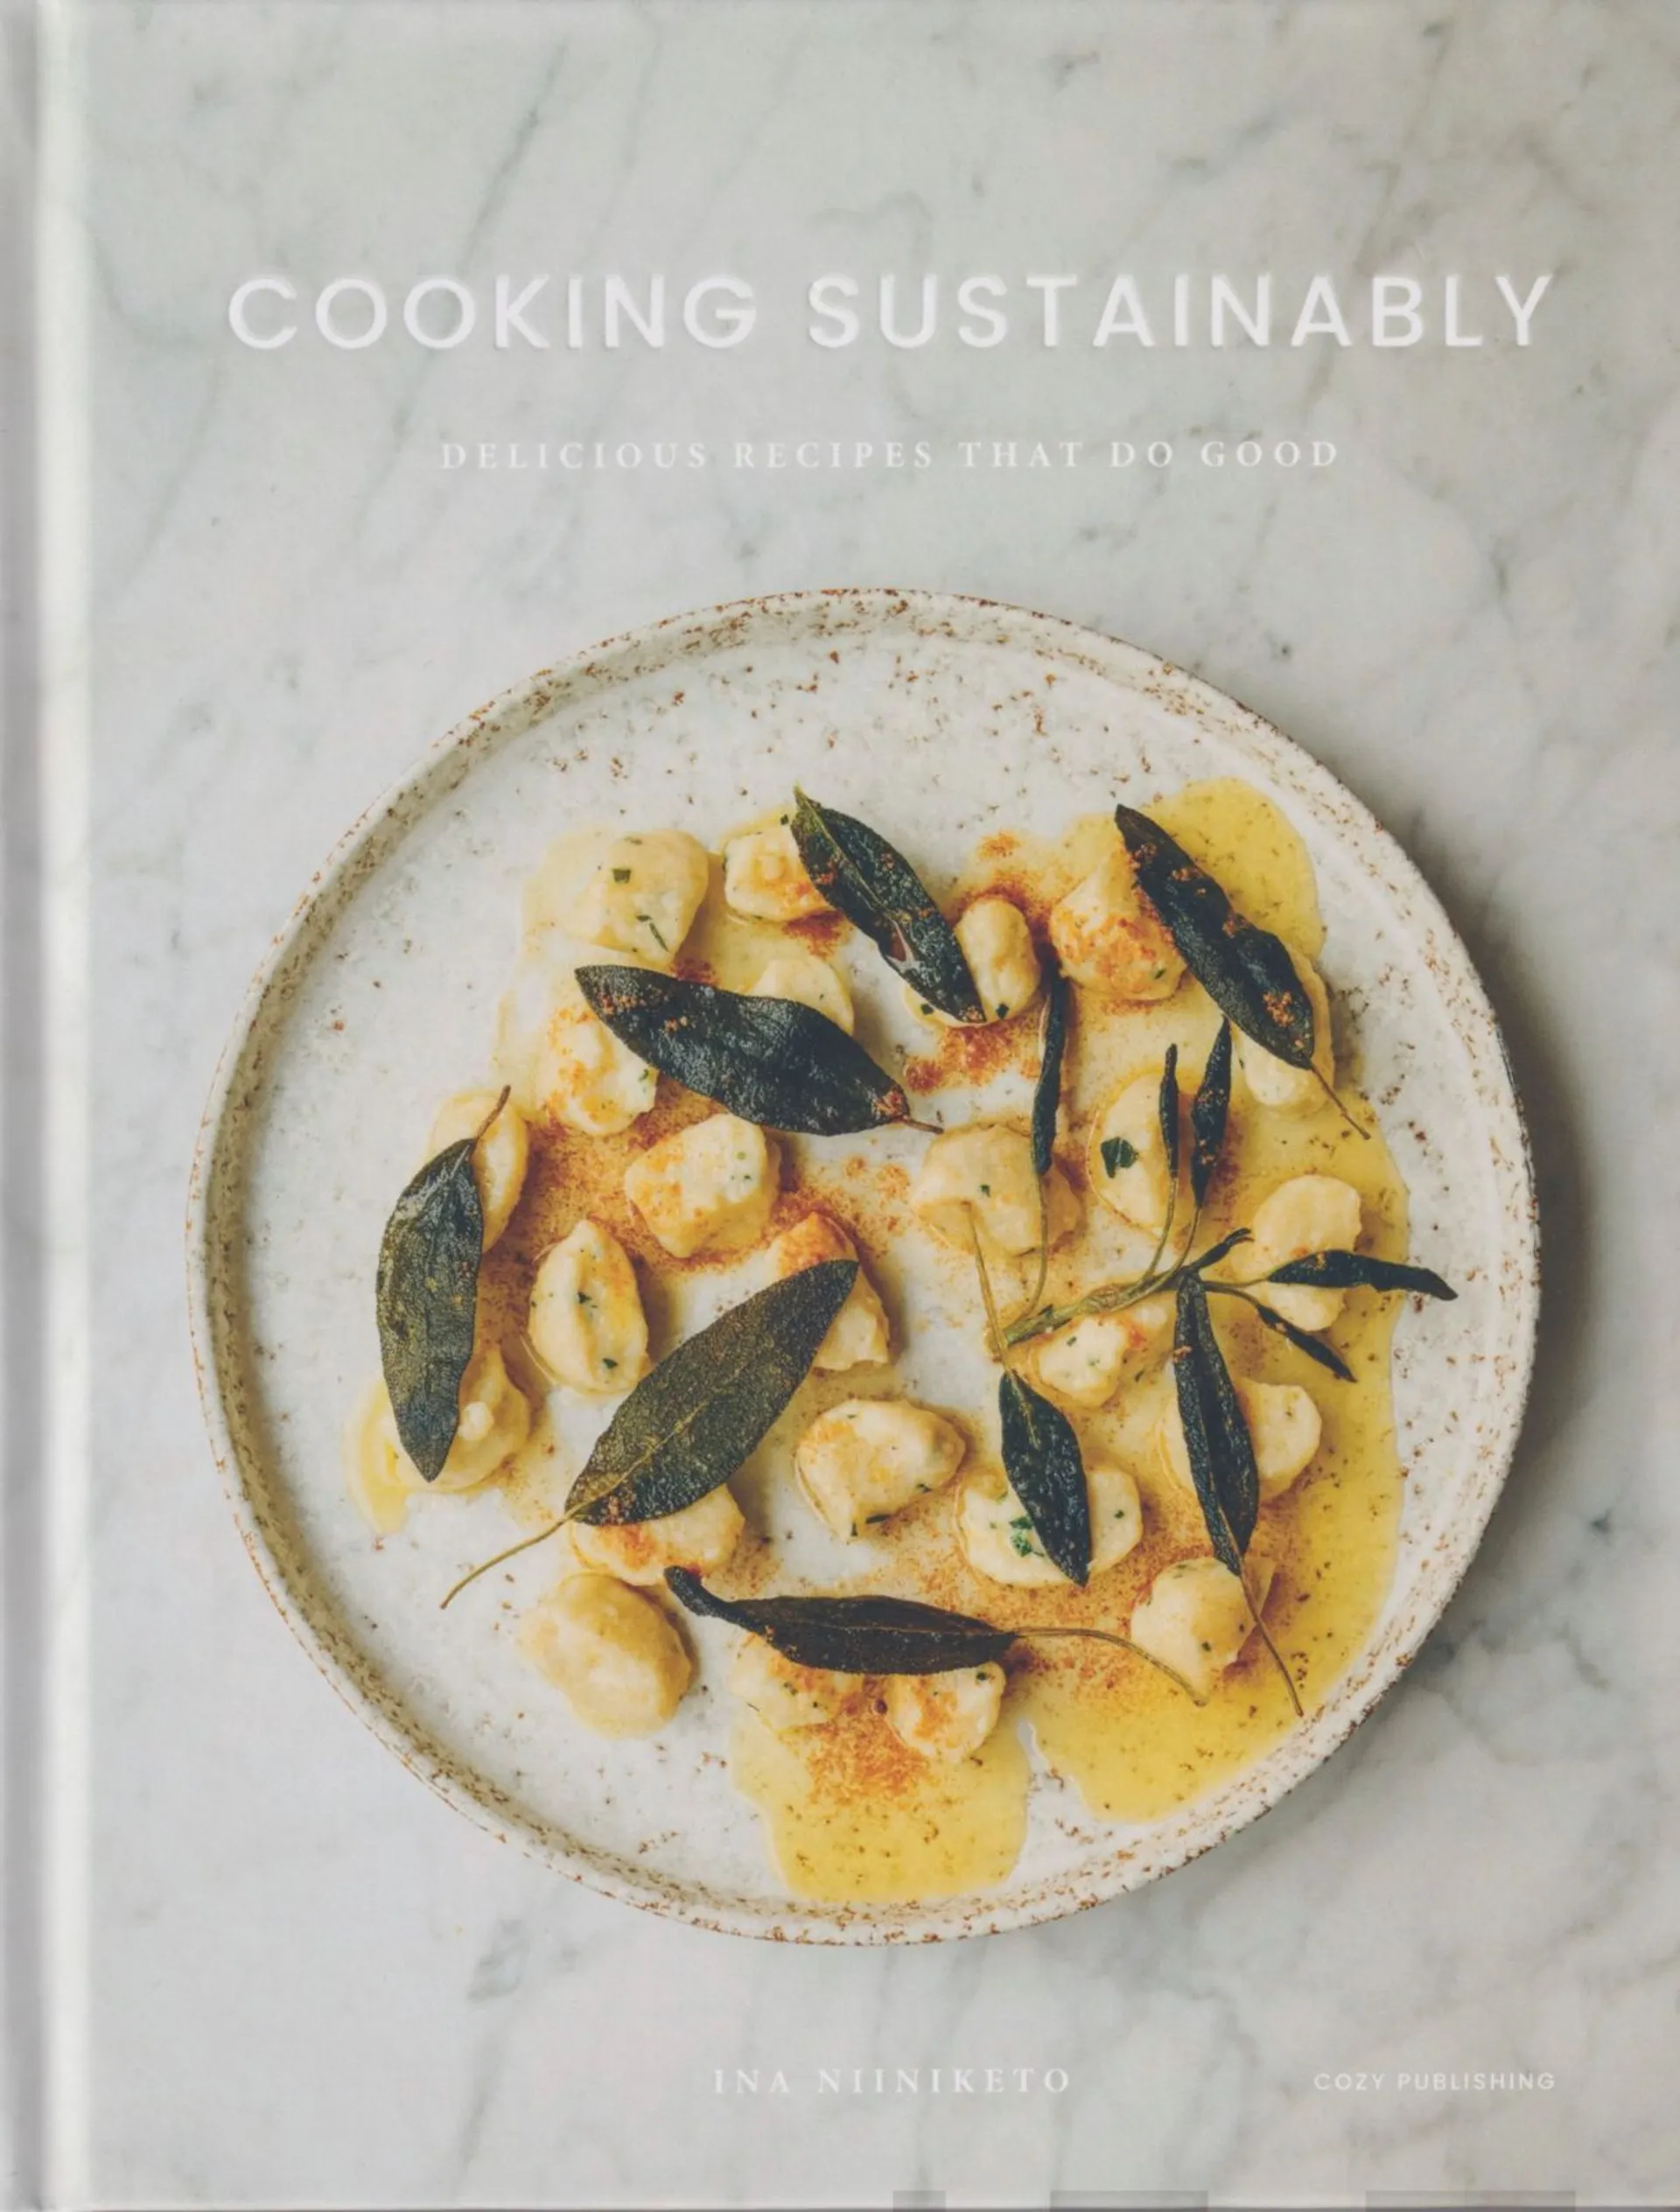 Niiniketo, COOKING SUSTAINABLY - Delicious recipes that do good